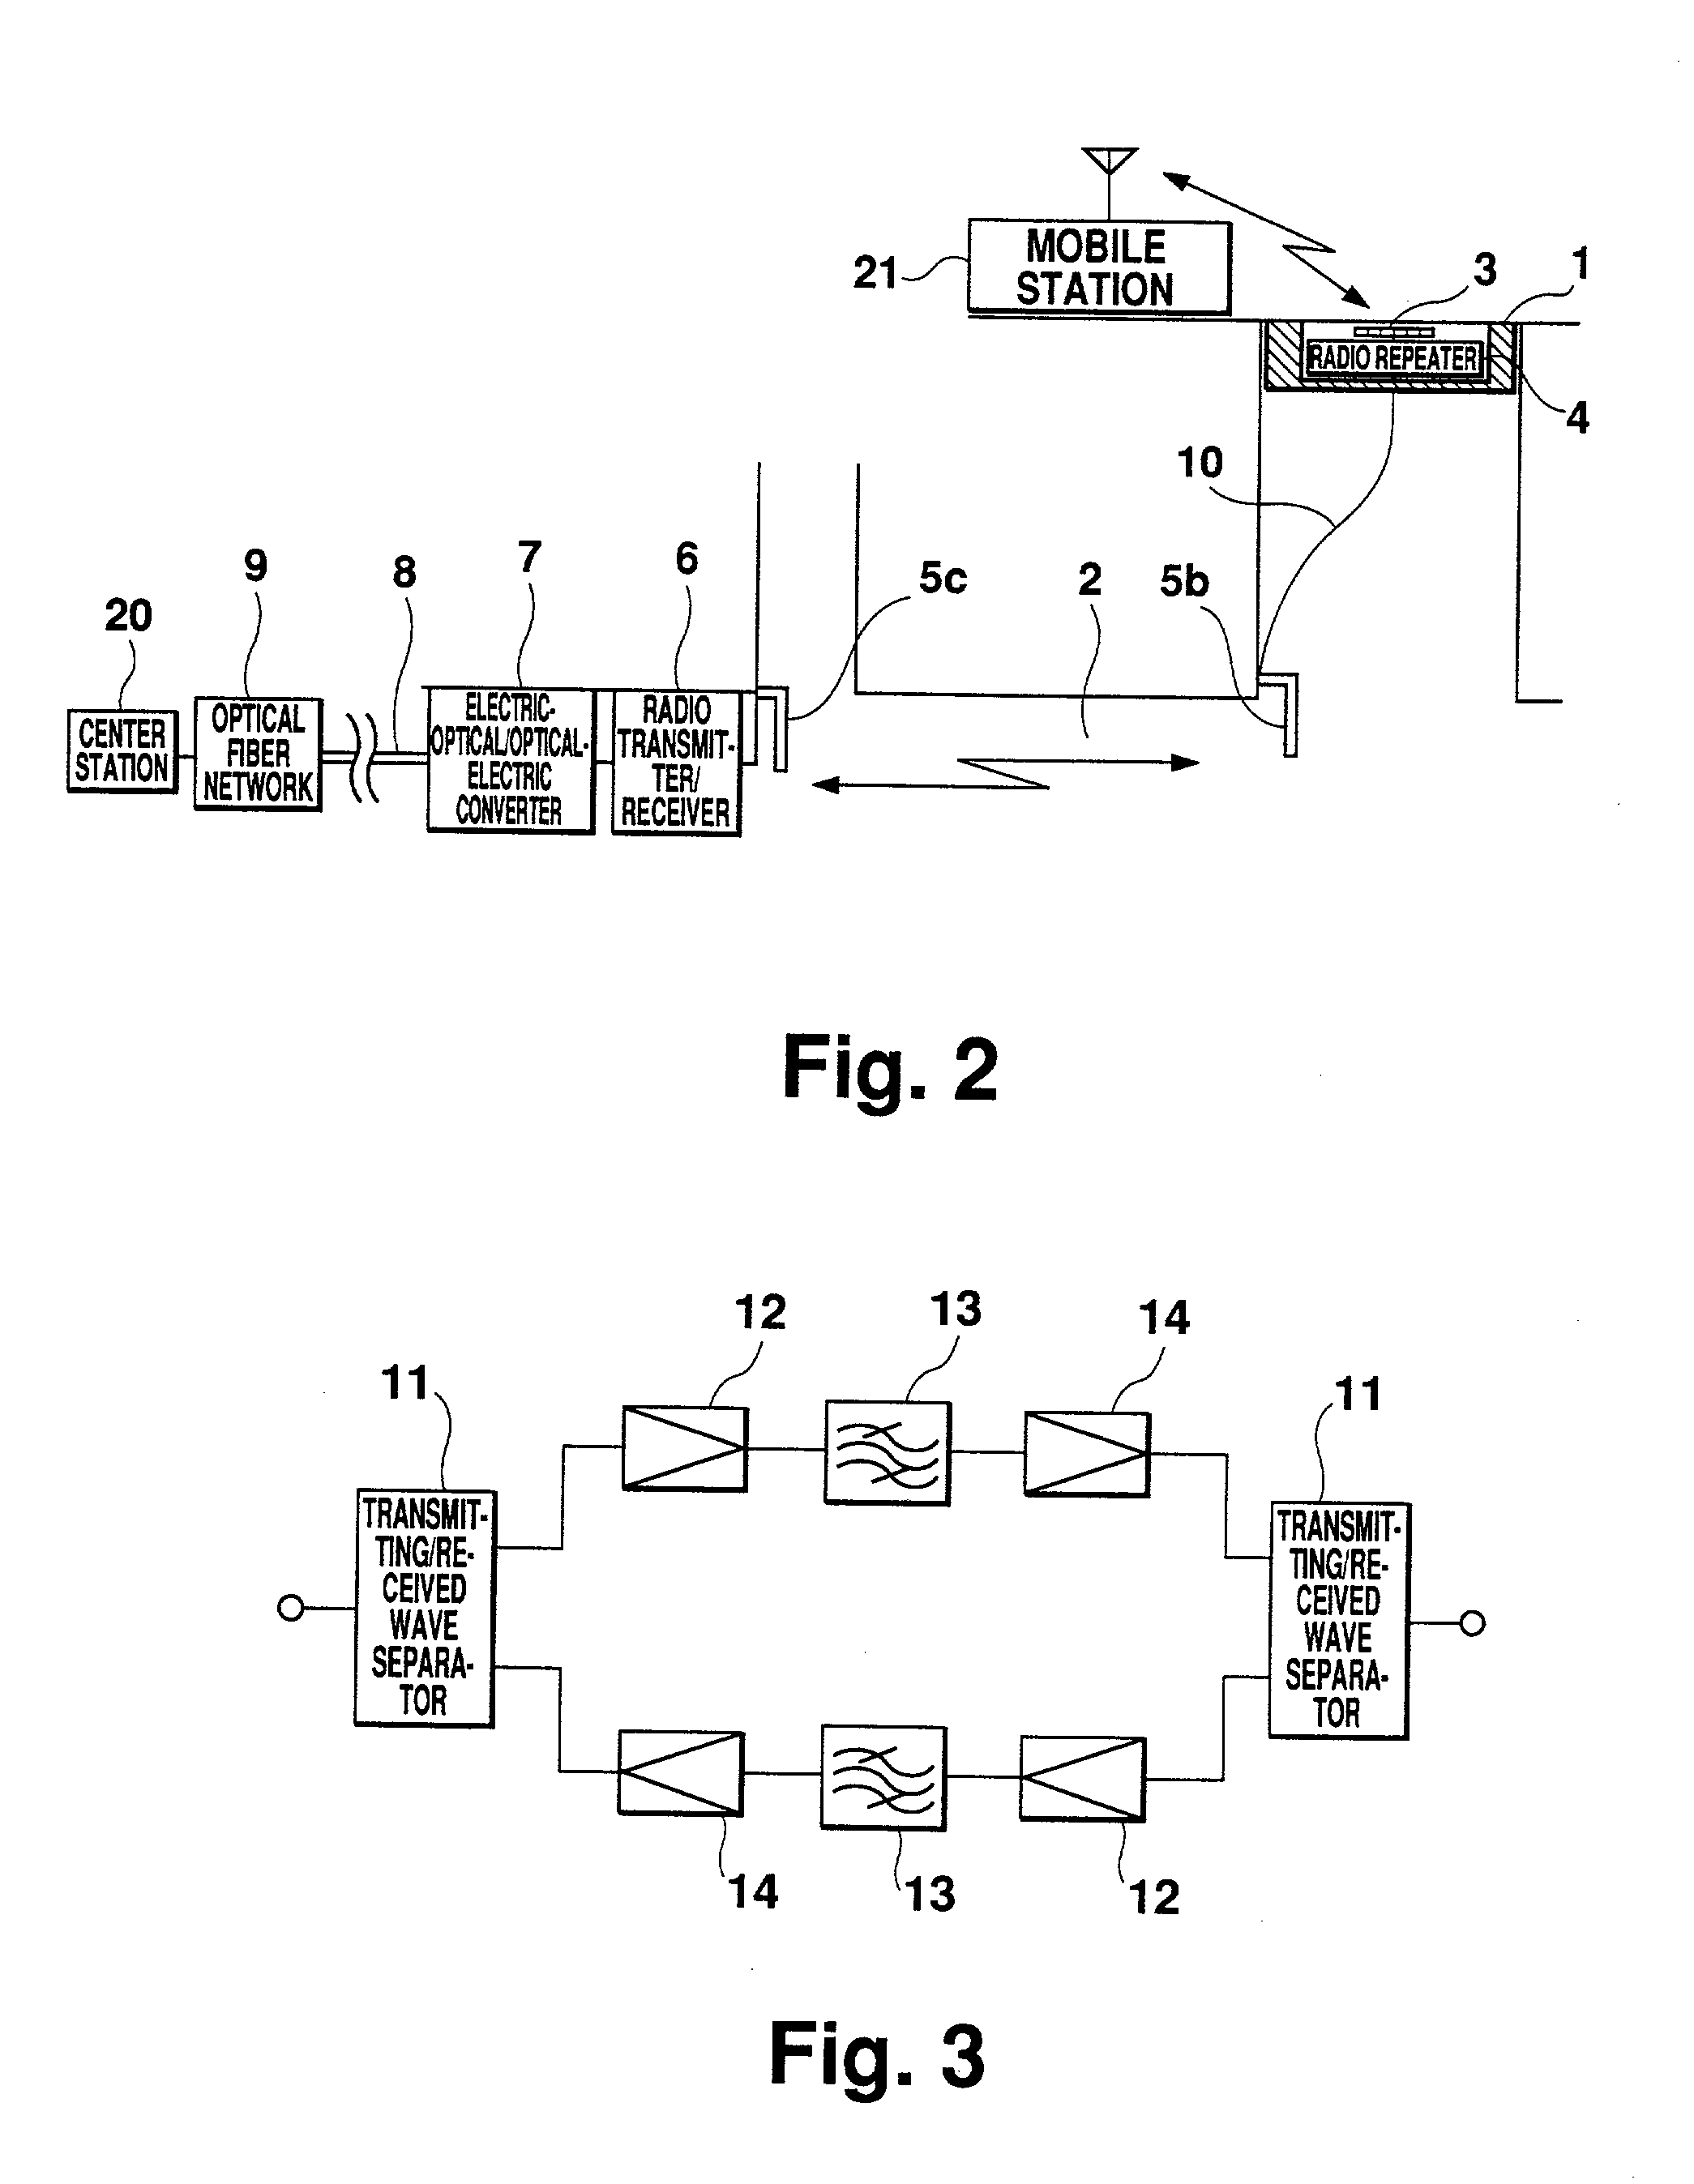 Underground information communication system and related manhole cover